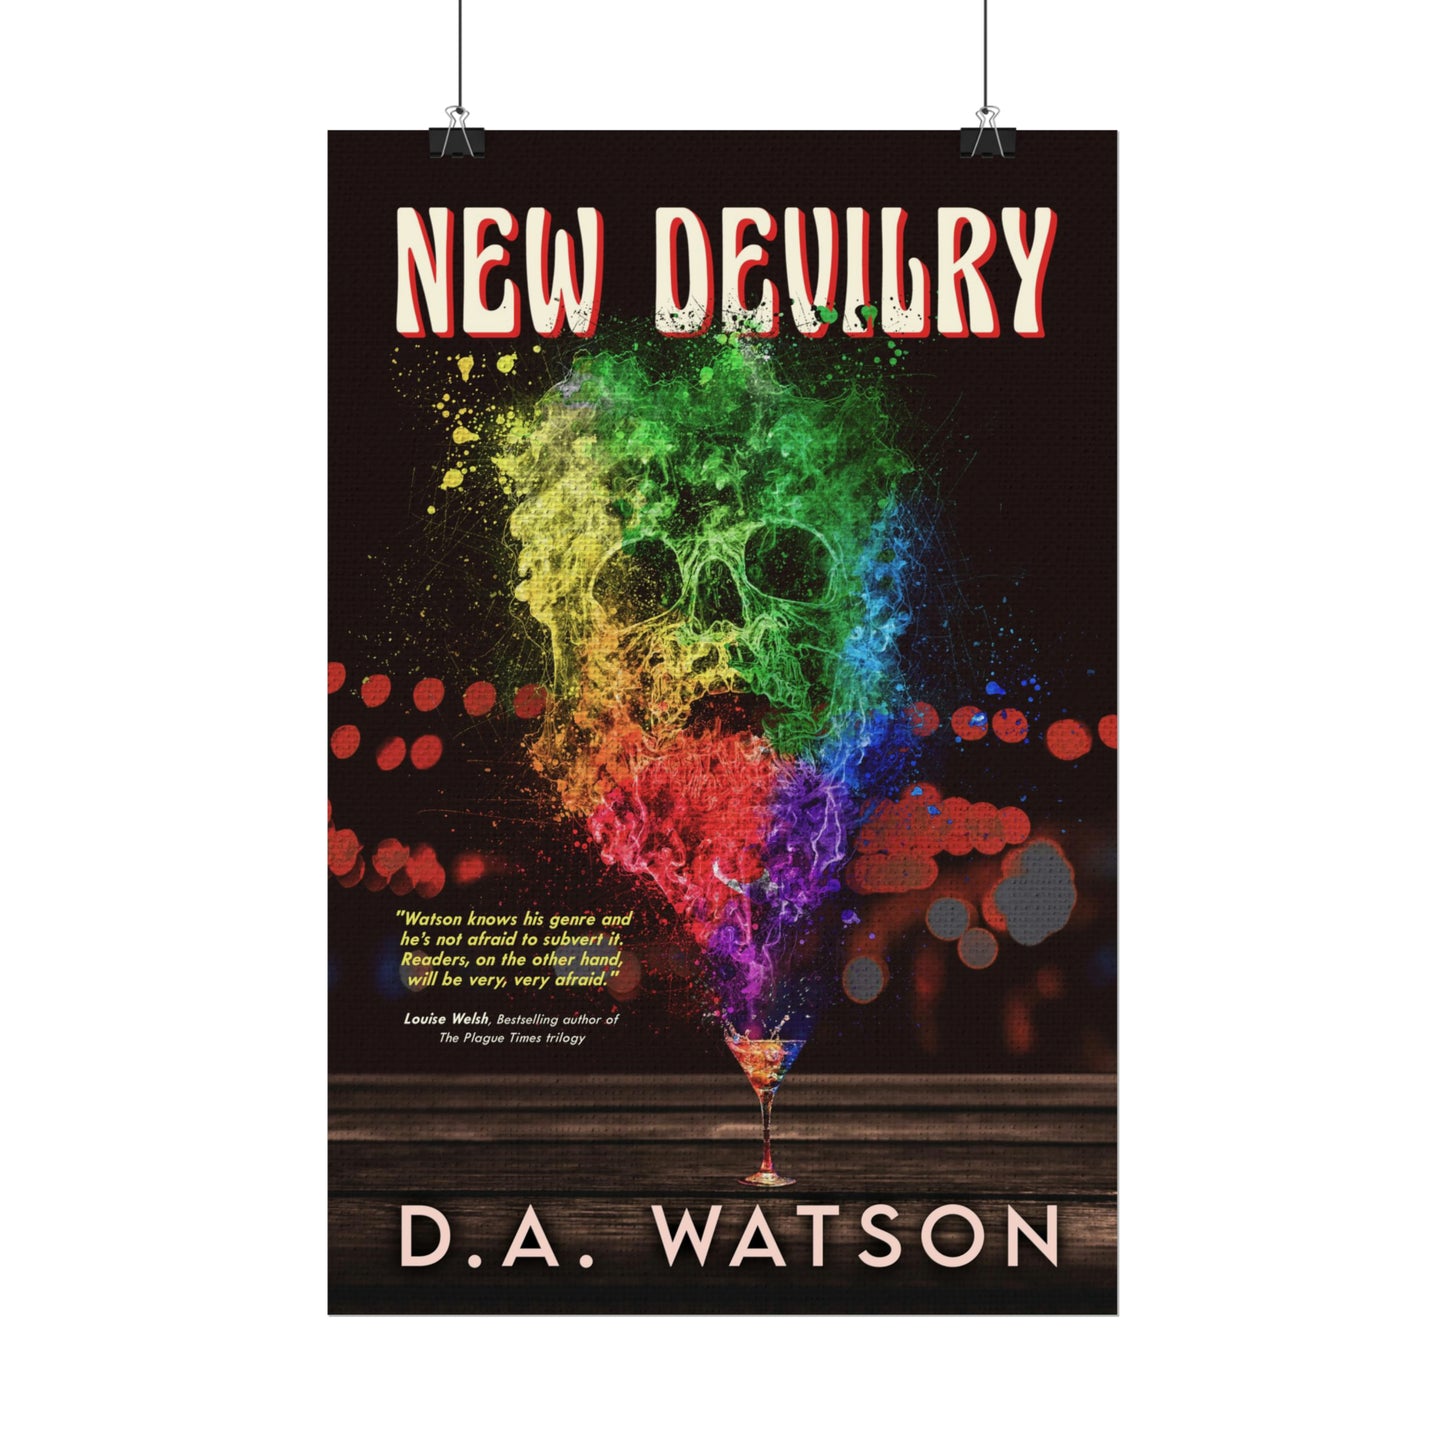 New Devilry - Rolled Poster